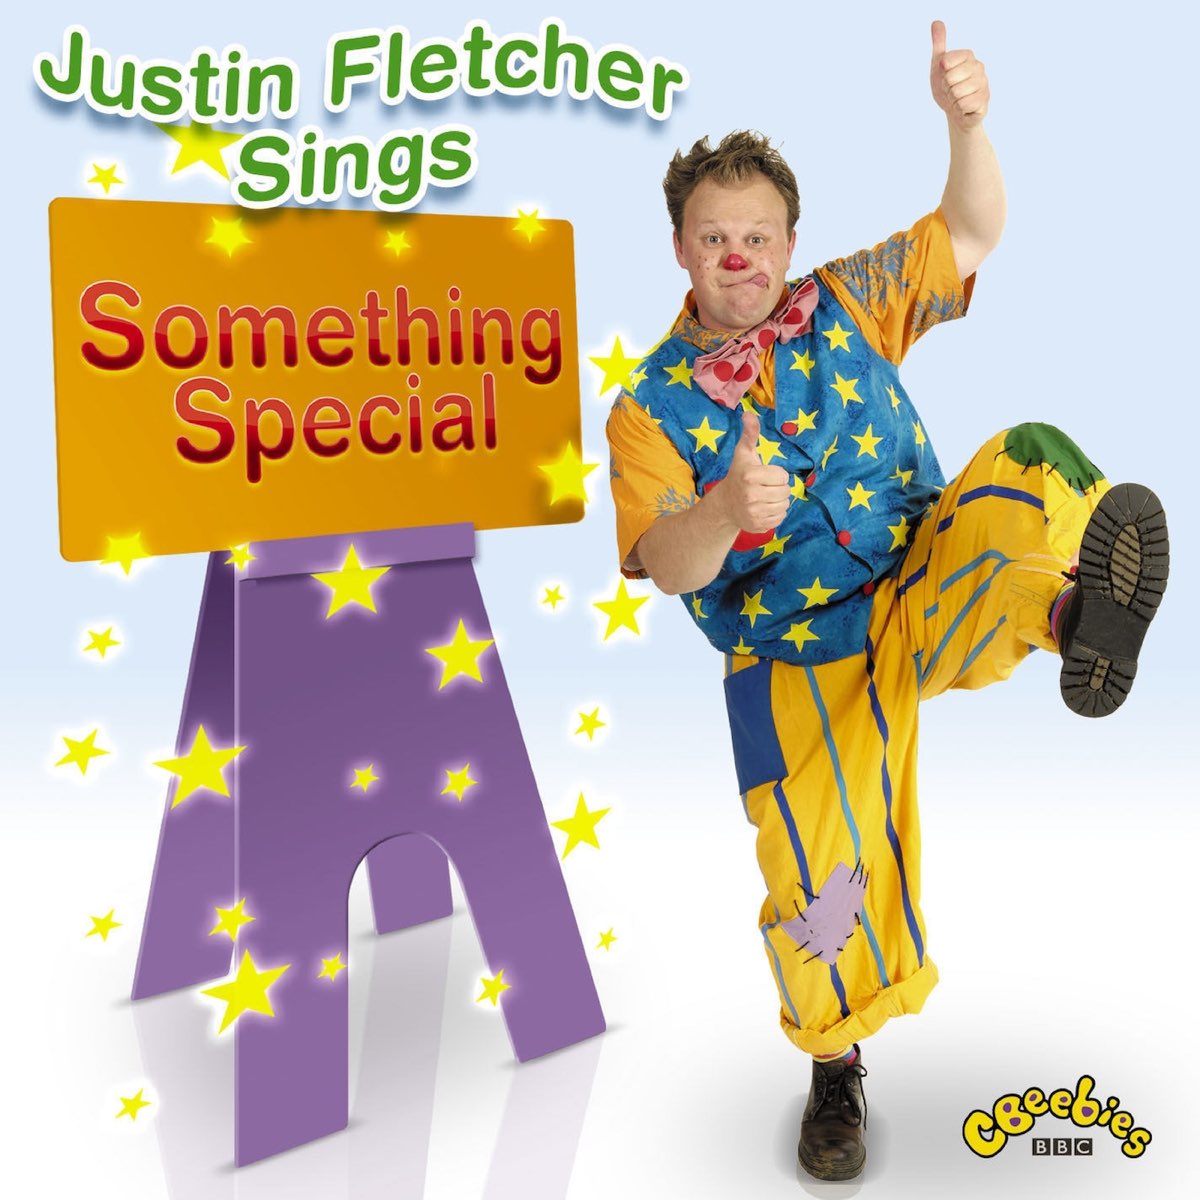 Justin Fletcher Sings Something Special by Justin Fletcher on Apple Music